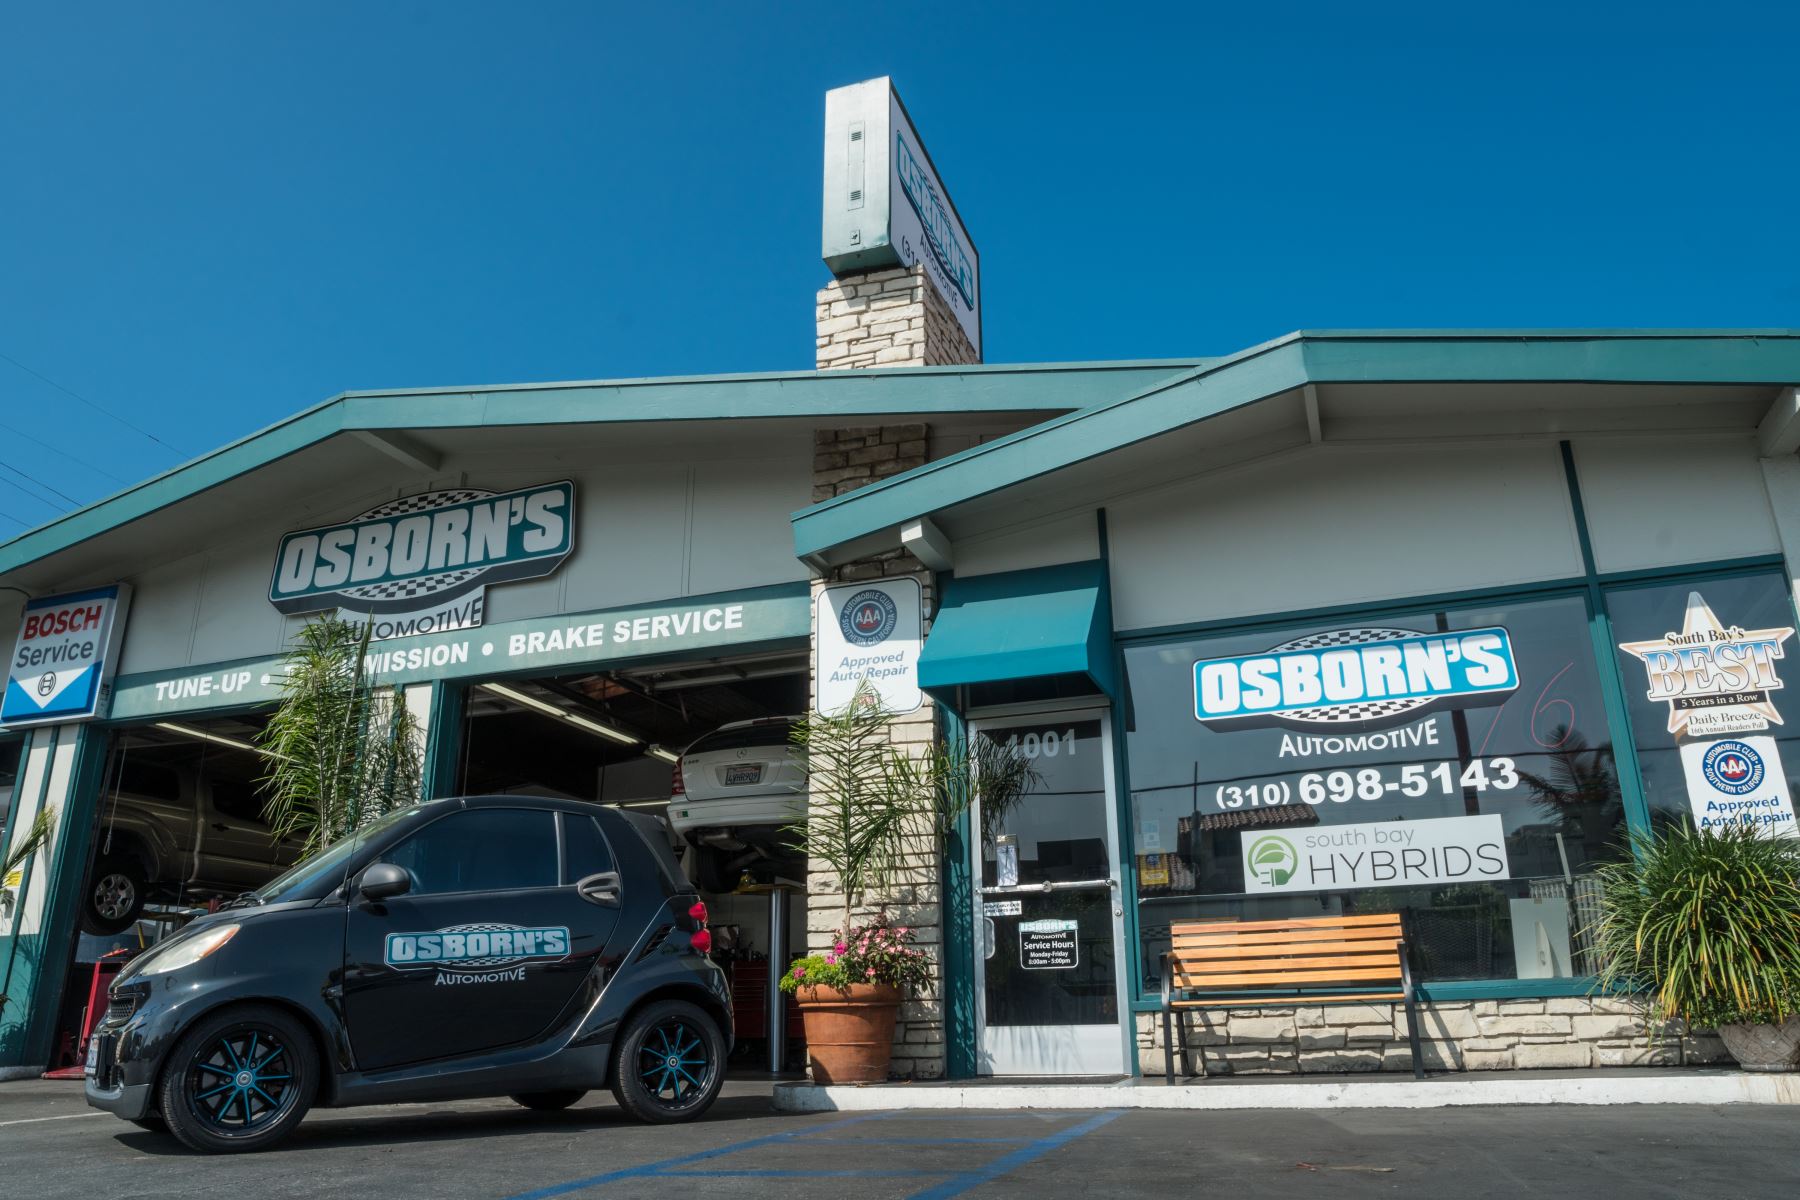 Auto Repair Services in Redondo Beach and Whittier | Pacific Tire Motorsports